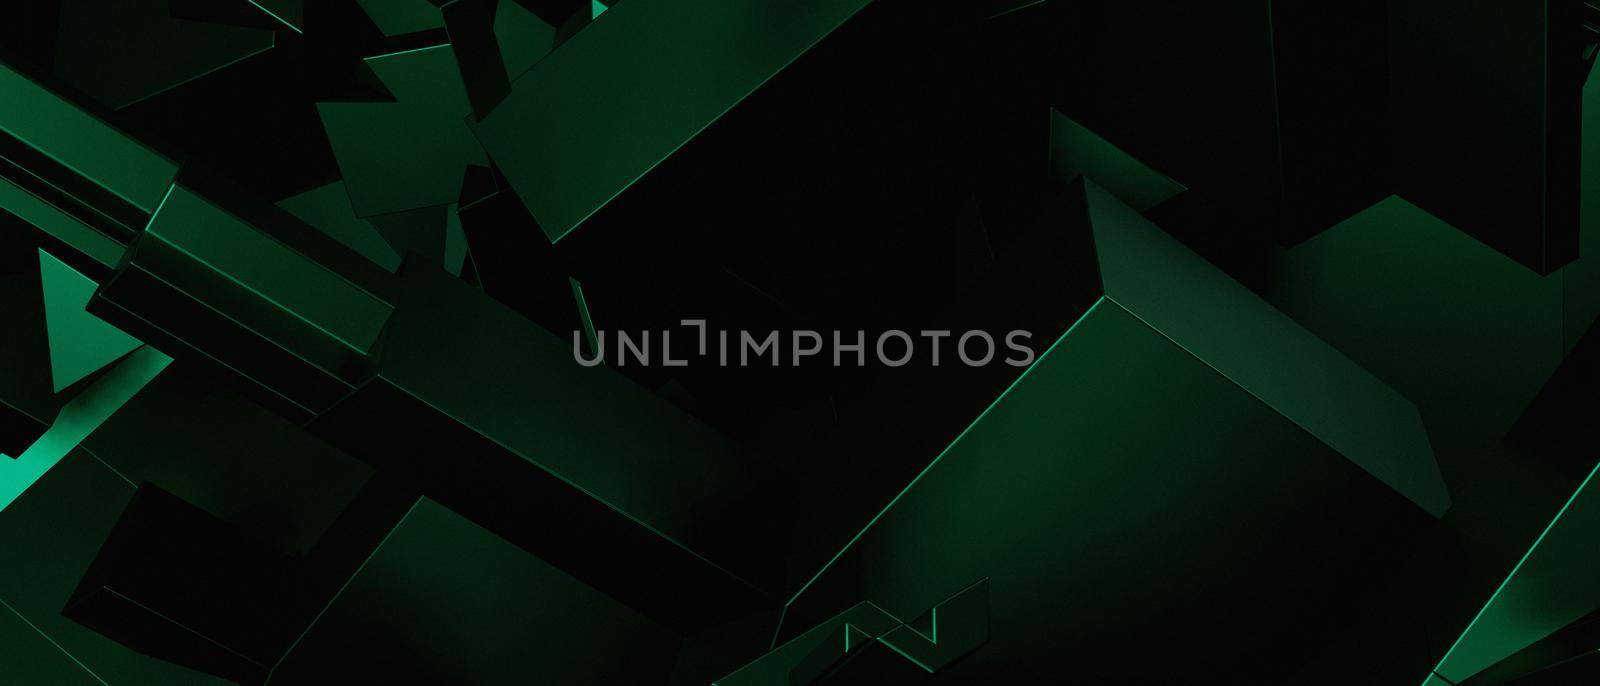 Abstract Luxurious Elegant Futuristic Shiny Block Chaos Three Dimensional Green Banner Background 3D